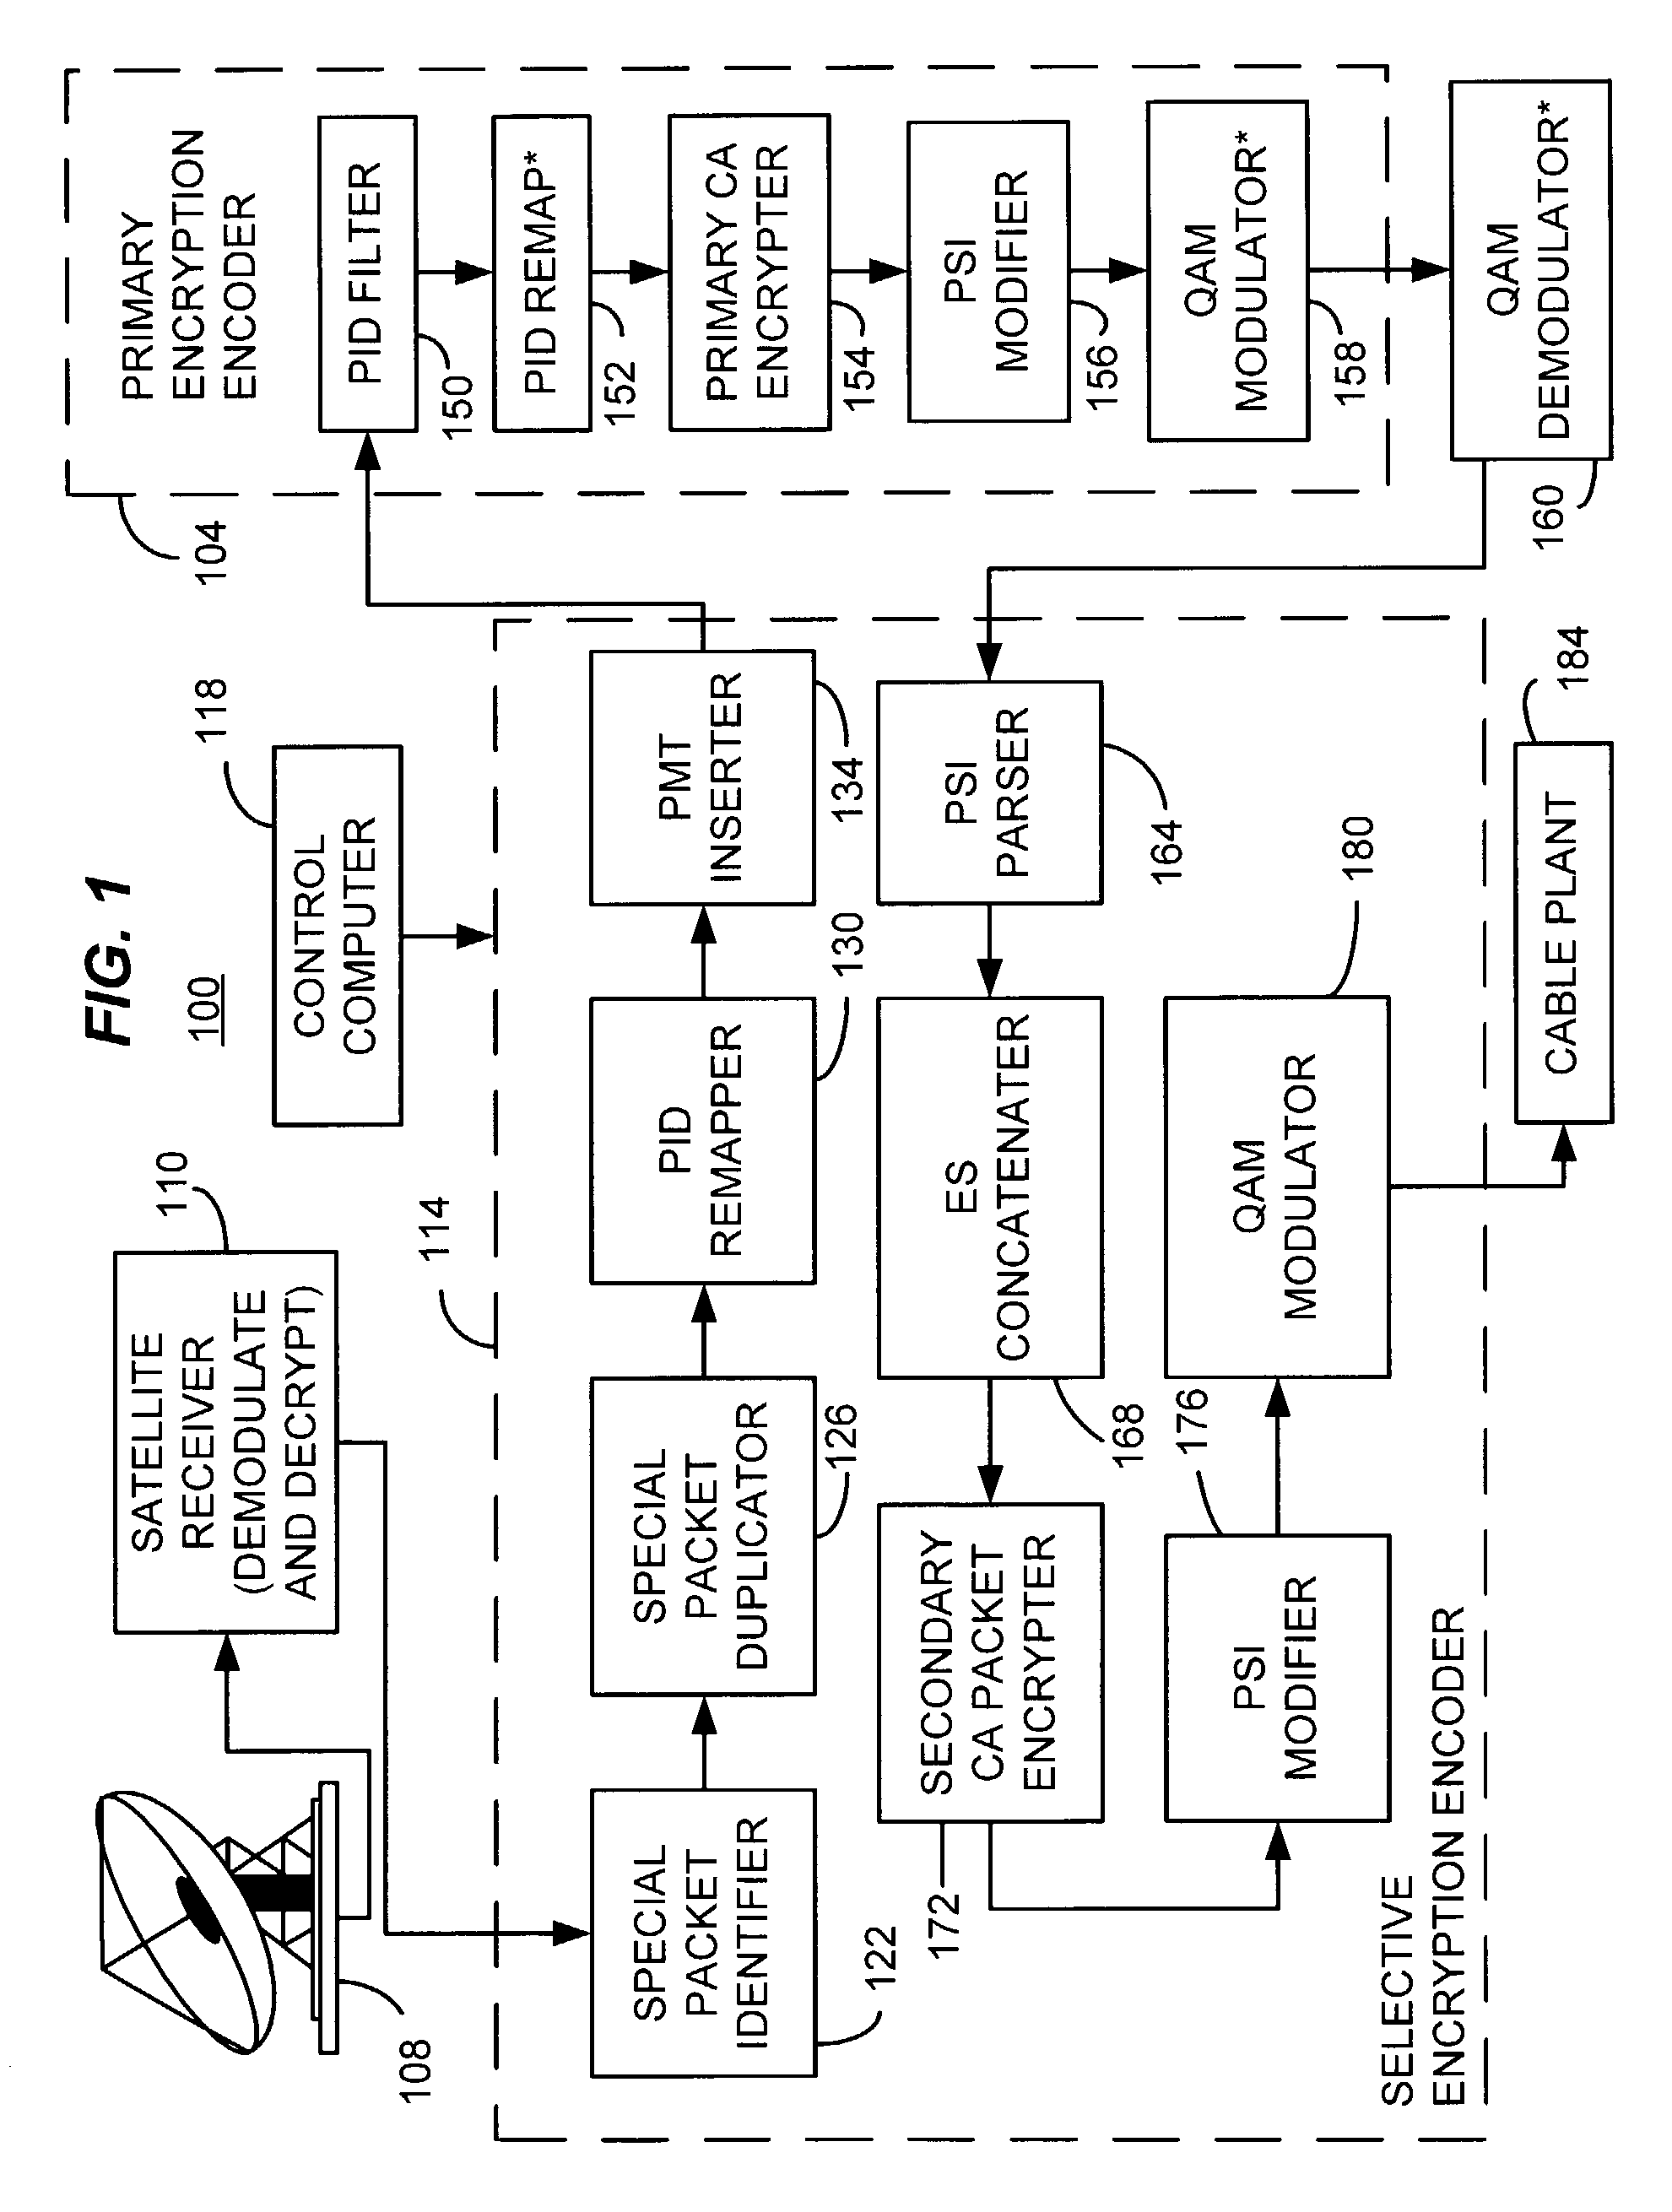 Encryption and content control in a digital broadcast system